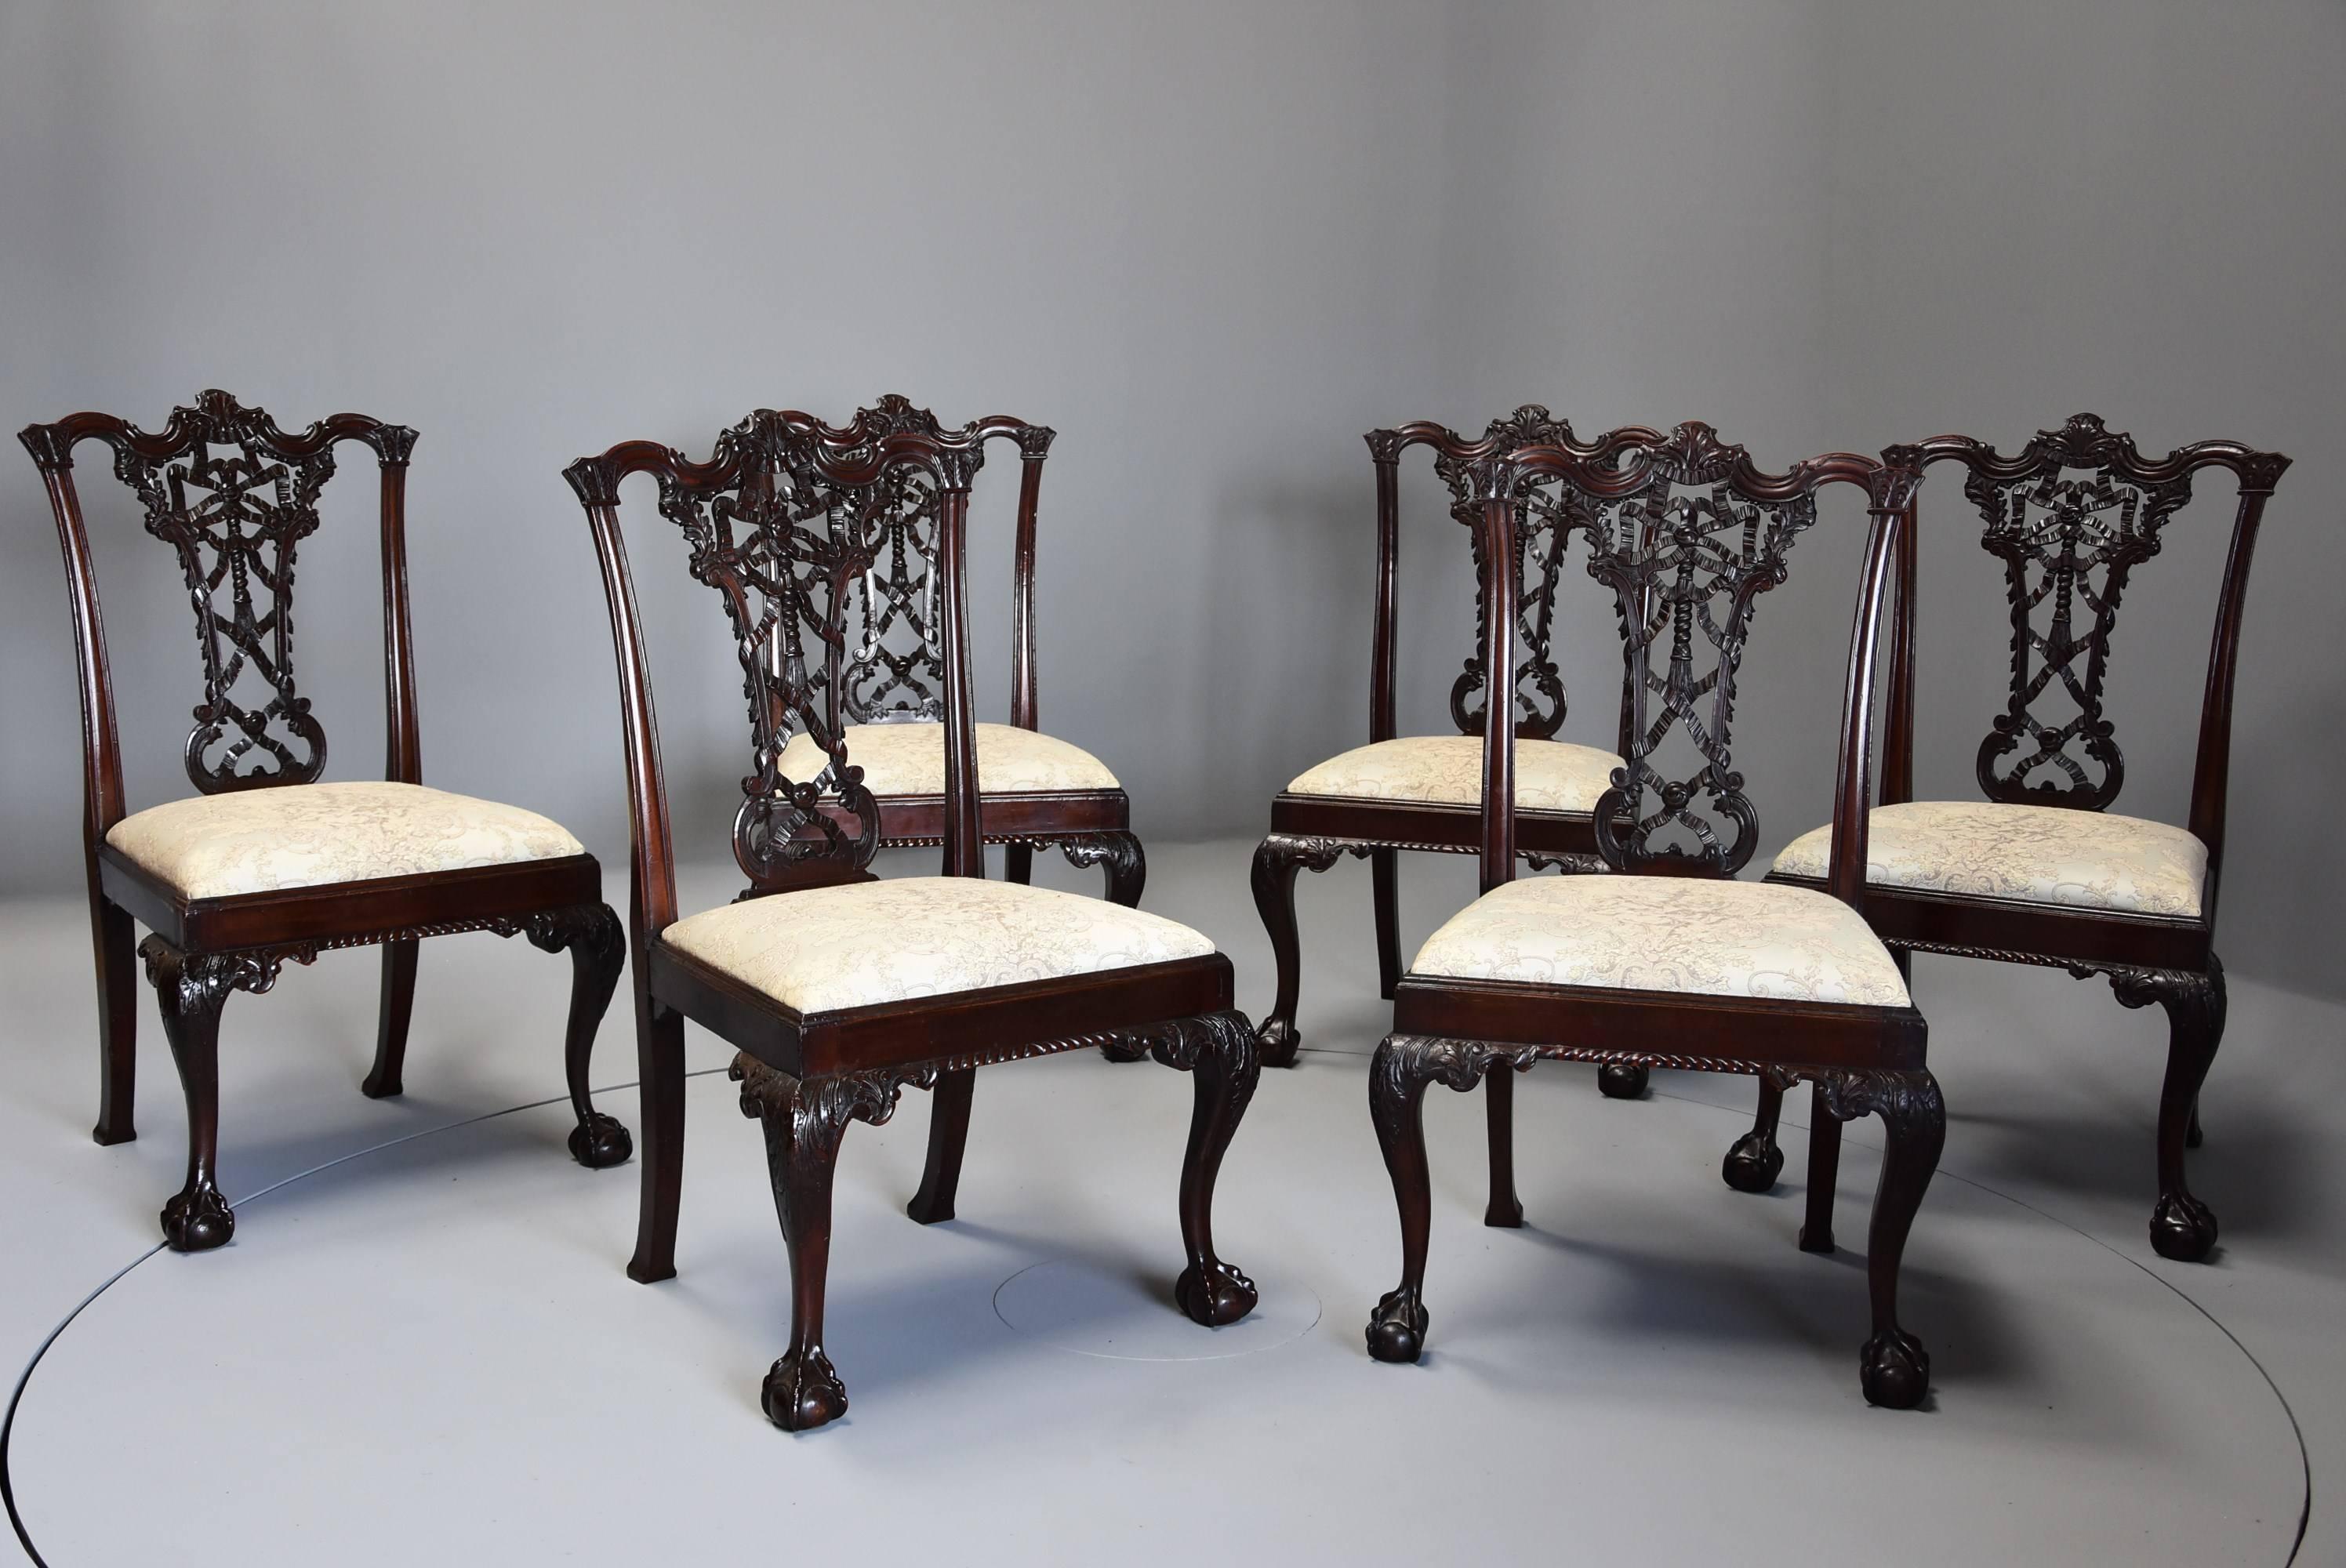 An early 20th century set of six mahogany ribbon back chairs in the Chippendale style.

This set of chairs consist of a shaped and carved top rail with central carved decoration with carved ears to either side leading down to moulded uprights with